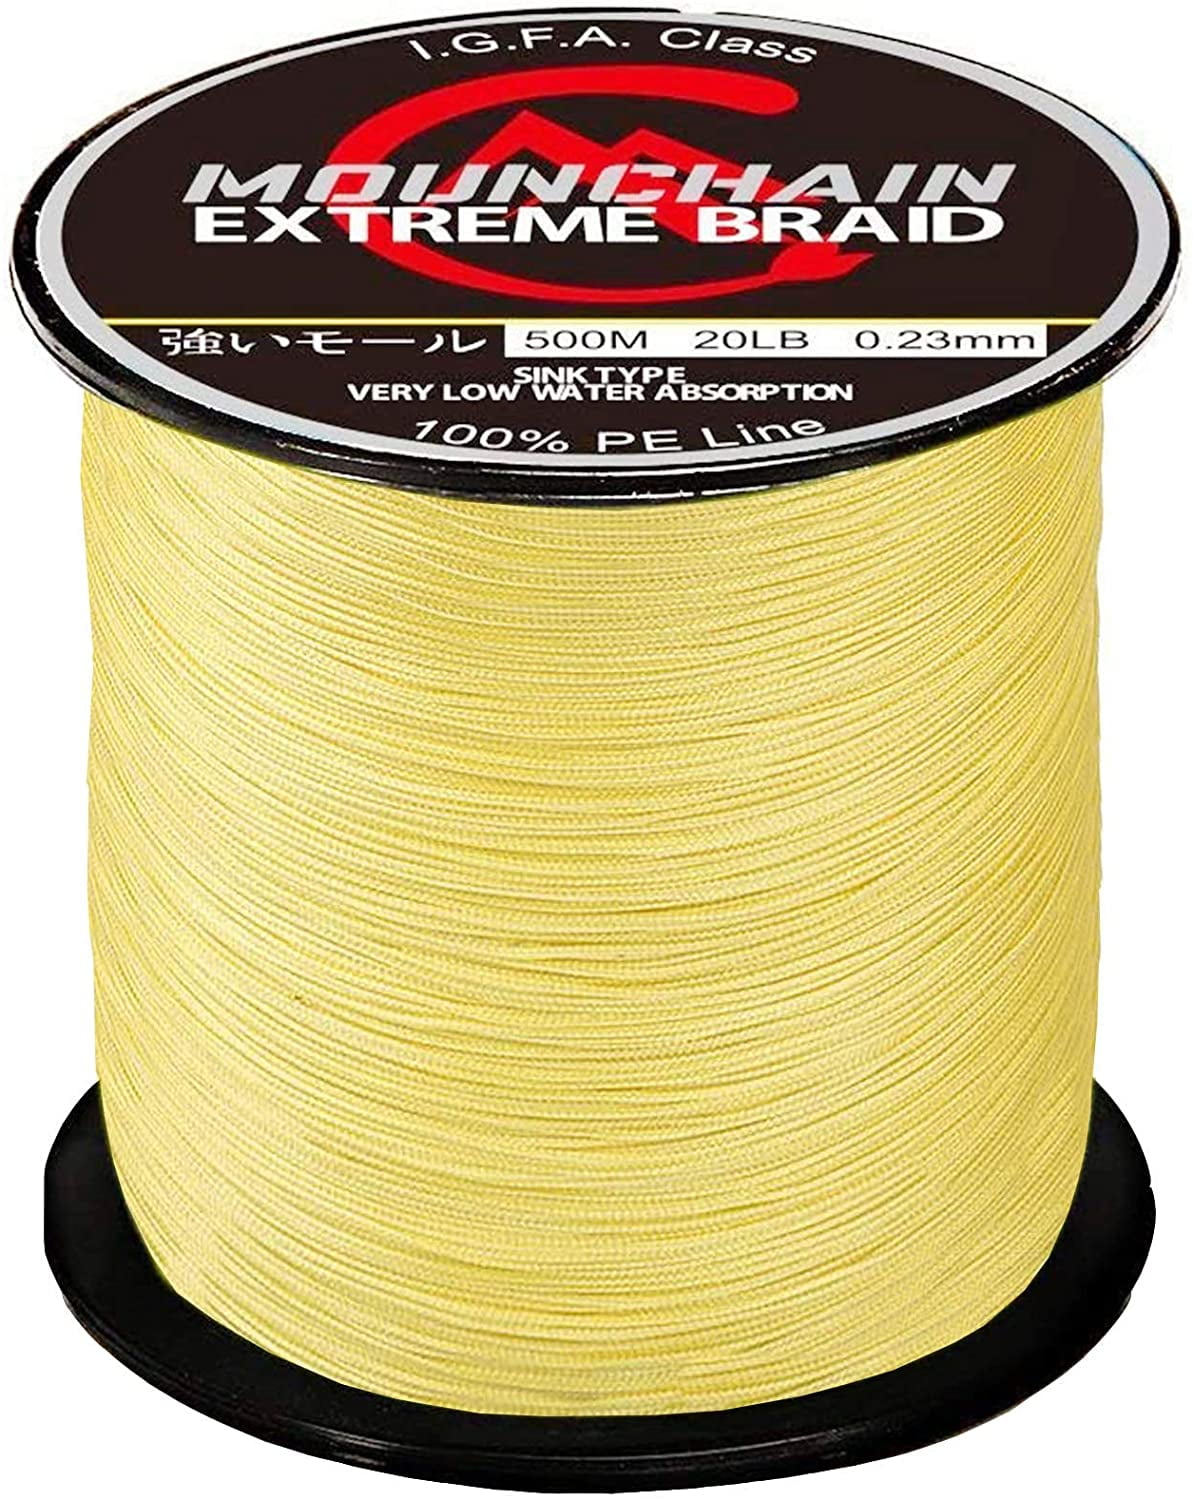 Dark Green 40LB Mounchain Braided Fishing Line 300M 8 Strands Abrasion Resistant Braided Lines Super Strong 100% PE Sensitive Fishing Line 